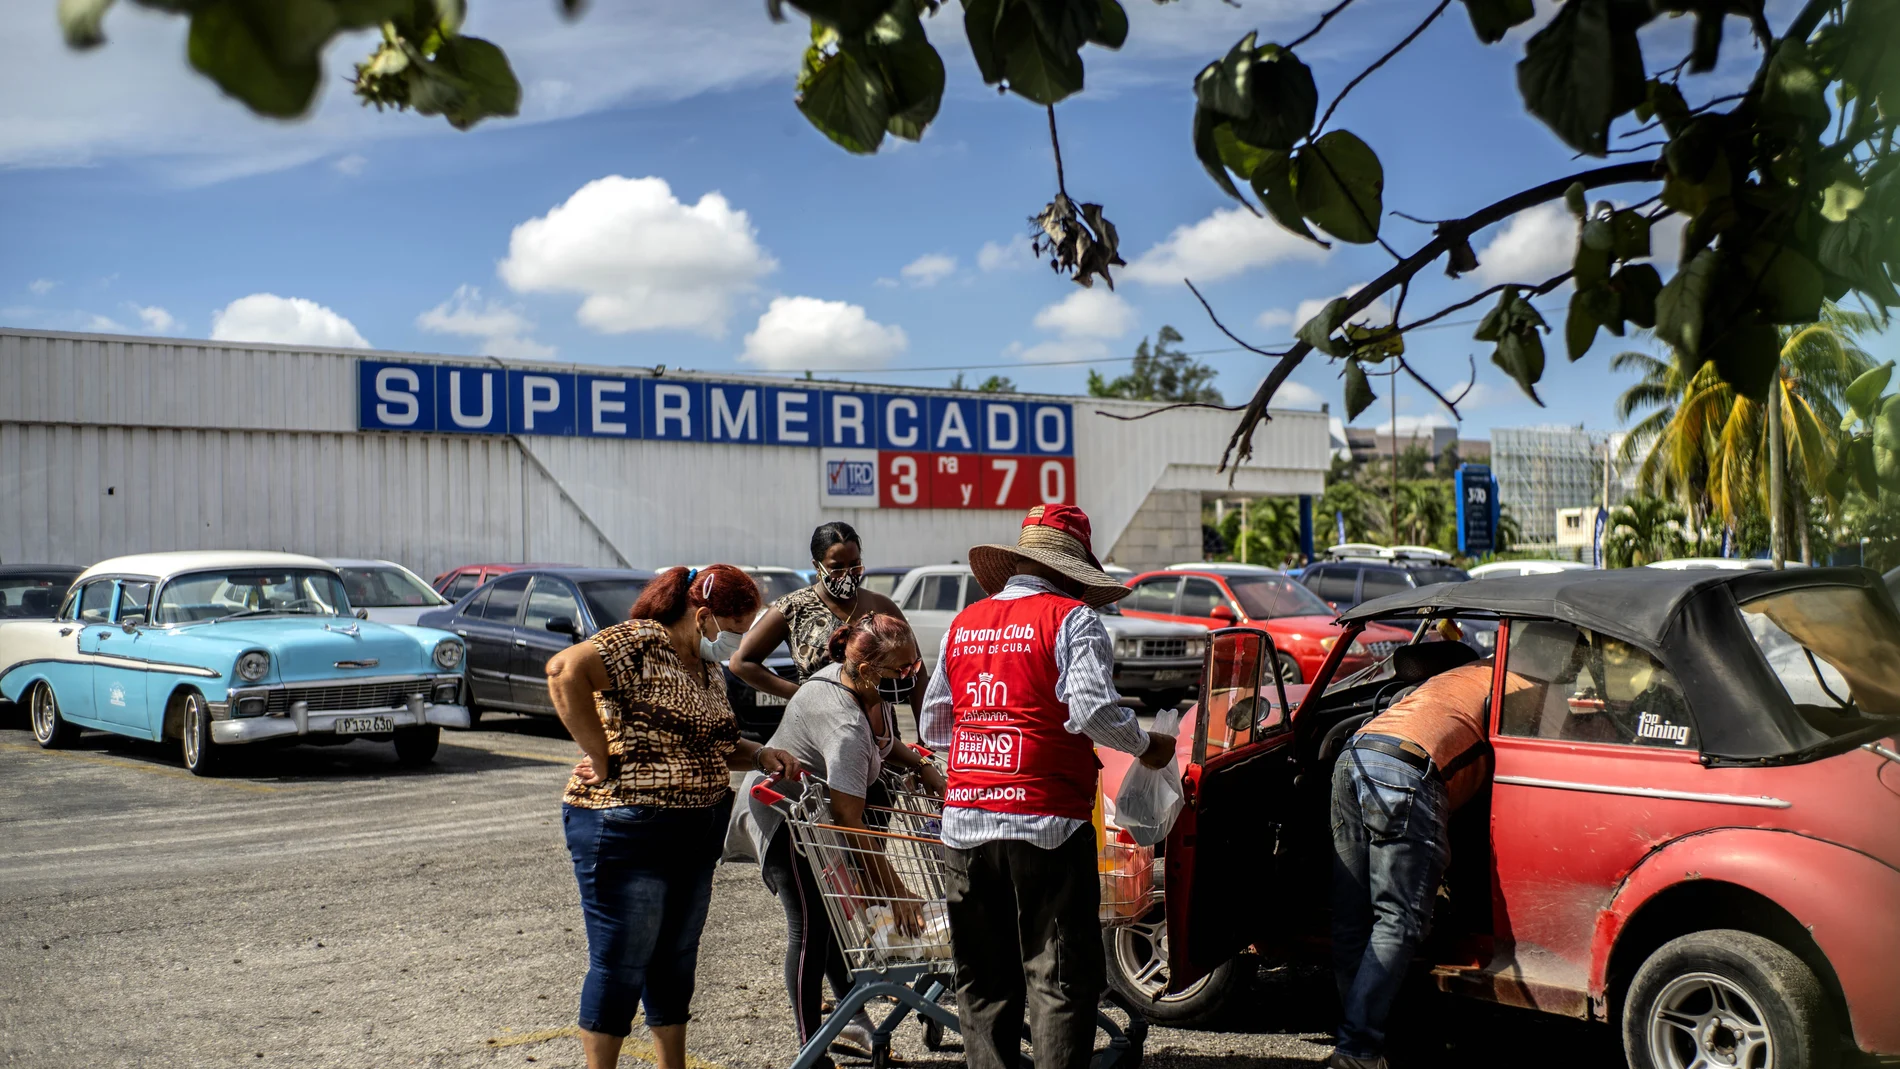 Shoppers wearing protective facemasks amid the spread of the new coronavirus load groceries from a dollar store in Havana, Cuba, Monday, July 20, 2020. Cuba has expanded the types of stores that accept dollars for payment to include food stores, as part of the governmentâ€™s effort to capture much needed hard currency to shore up the islandâ€™s ailing economy. (AP Photo/Ramon Espinosa)